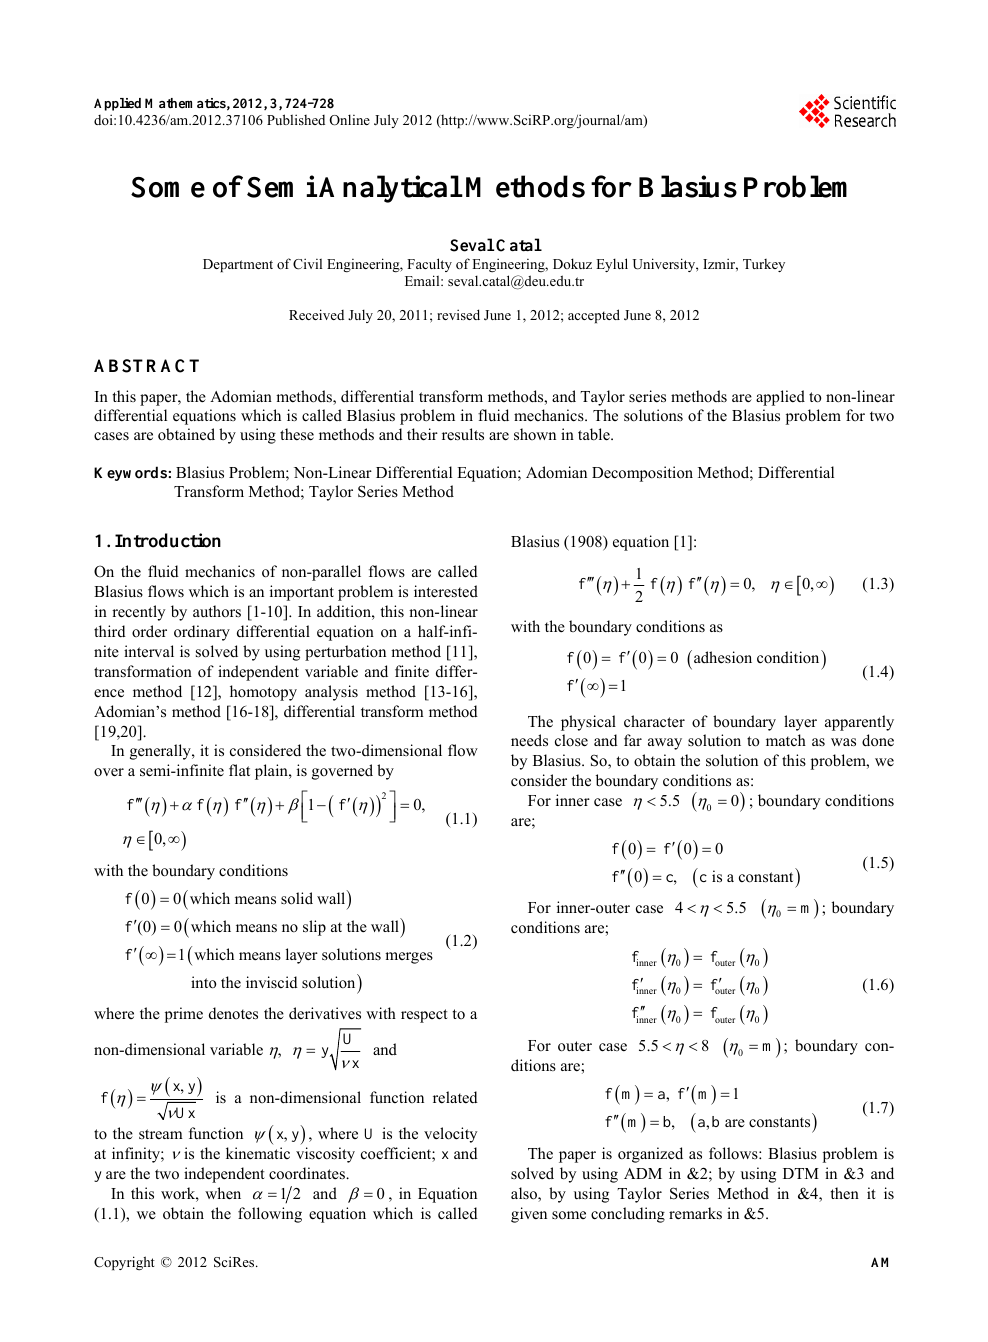 Some Of Semi Analytical Methods For Blasius Problem Topic Of Research Paper In Mathematics Download Scholarly Article Pdf And Read For Free On Cyberleninka Open Science Hub